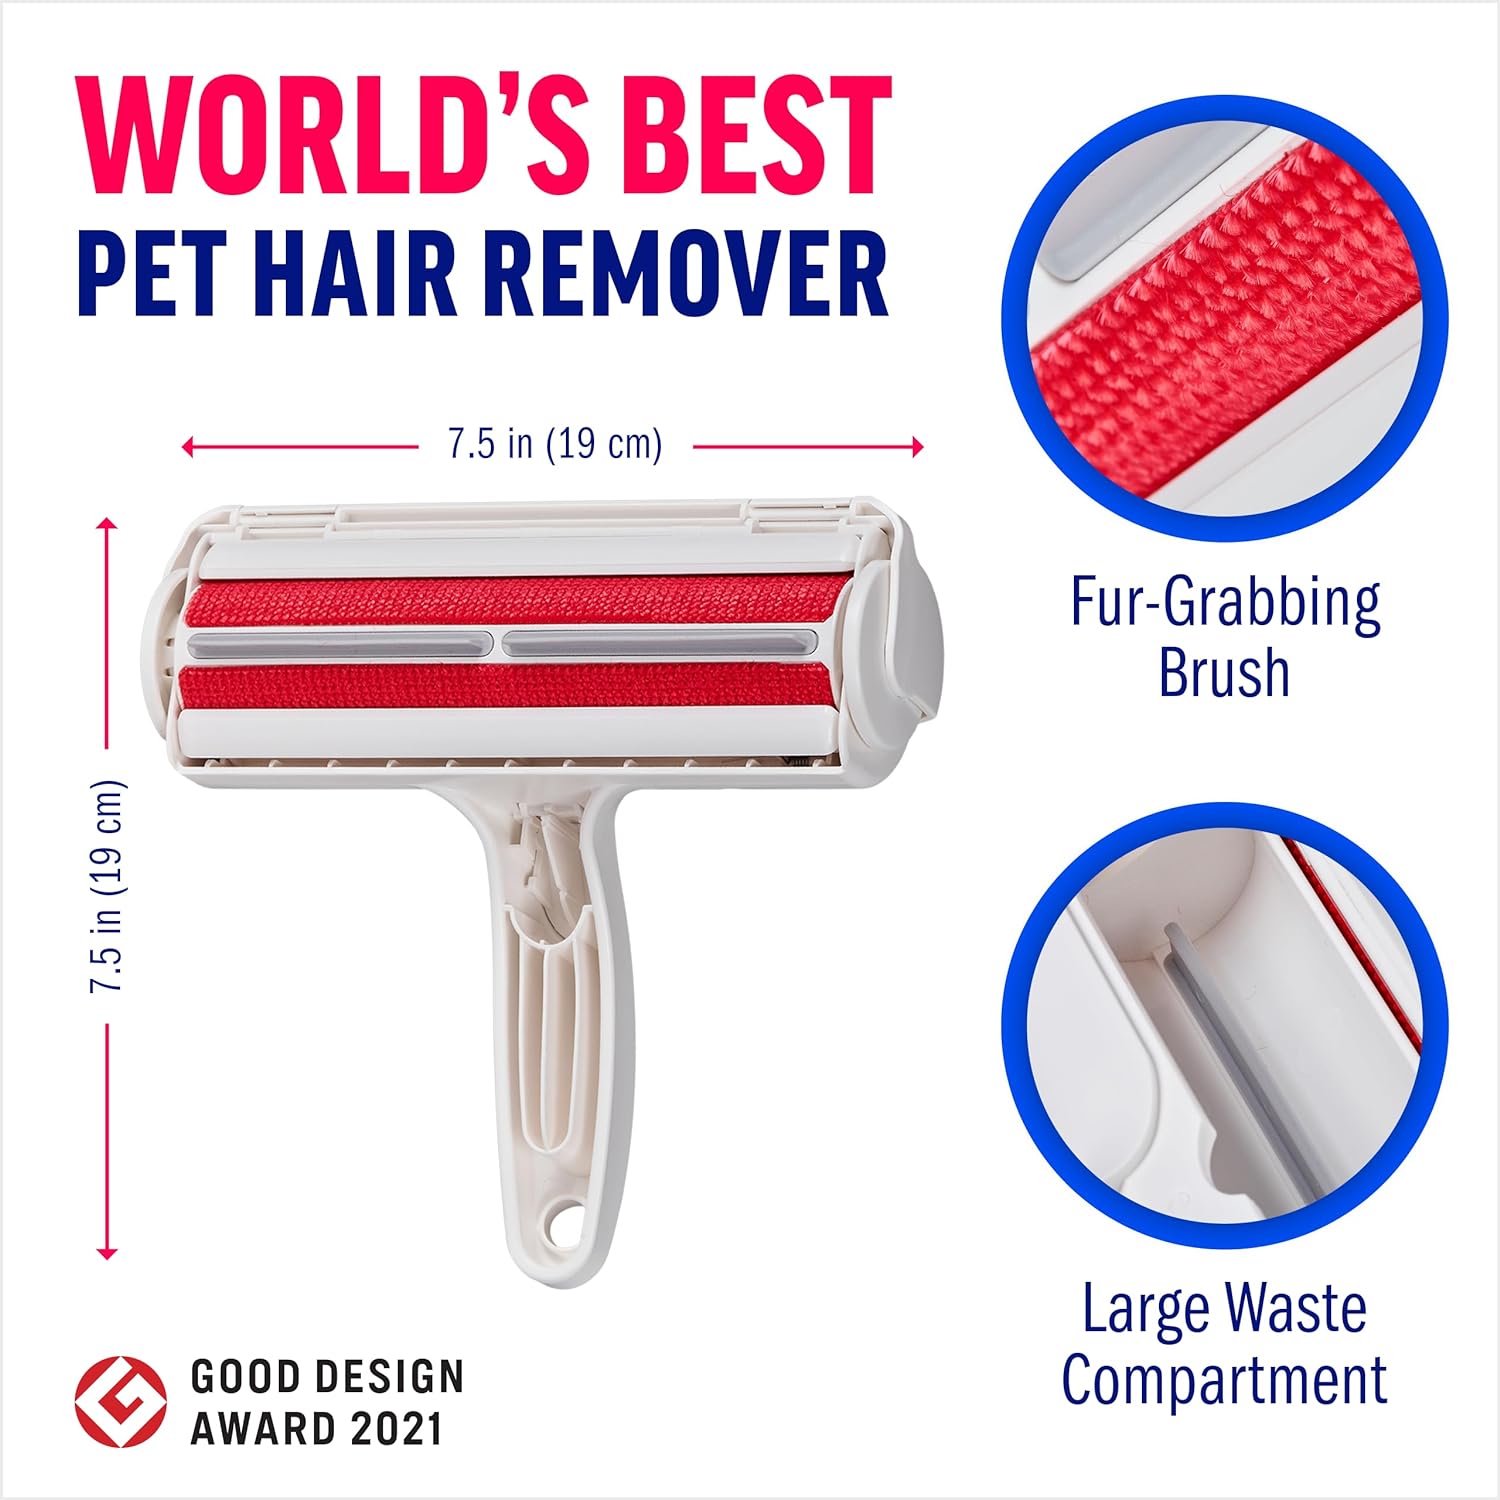 Chom Chom Roller - Pet Hair Remover and Reusable Lint Roller